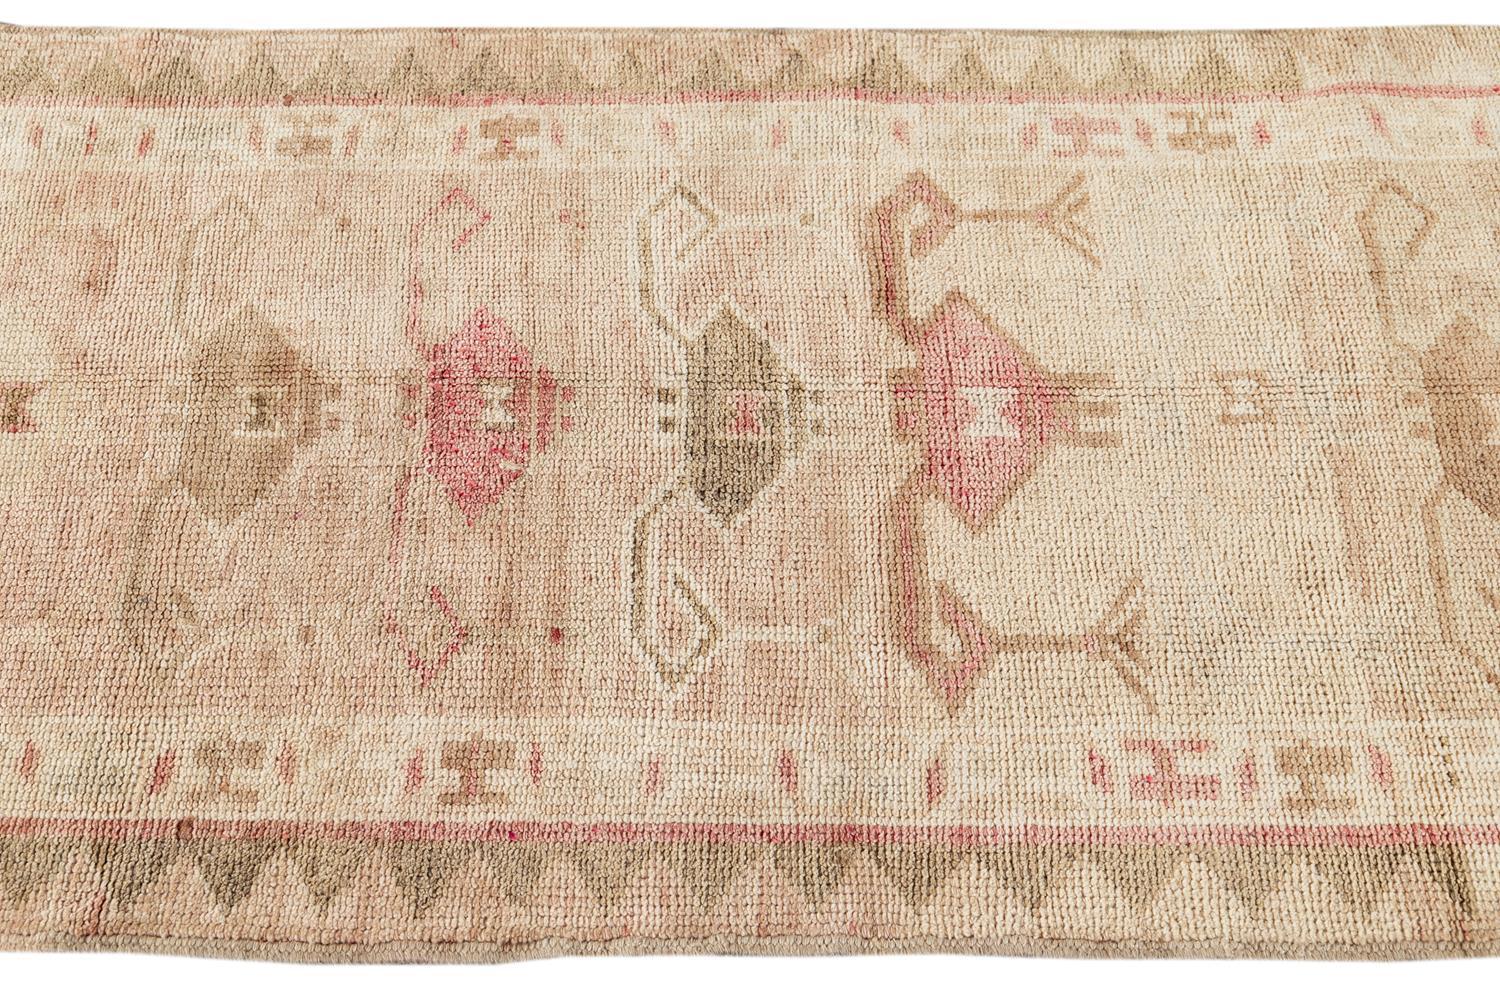 Early 20th Century Anatolian Village Runner Rug In Good Condition For Sale In Norwalk, CT